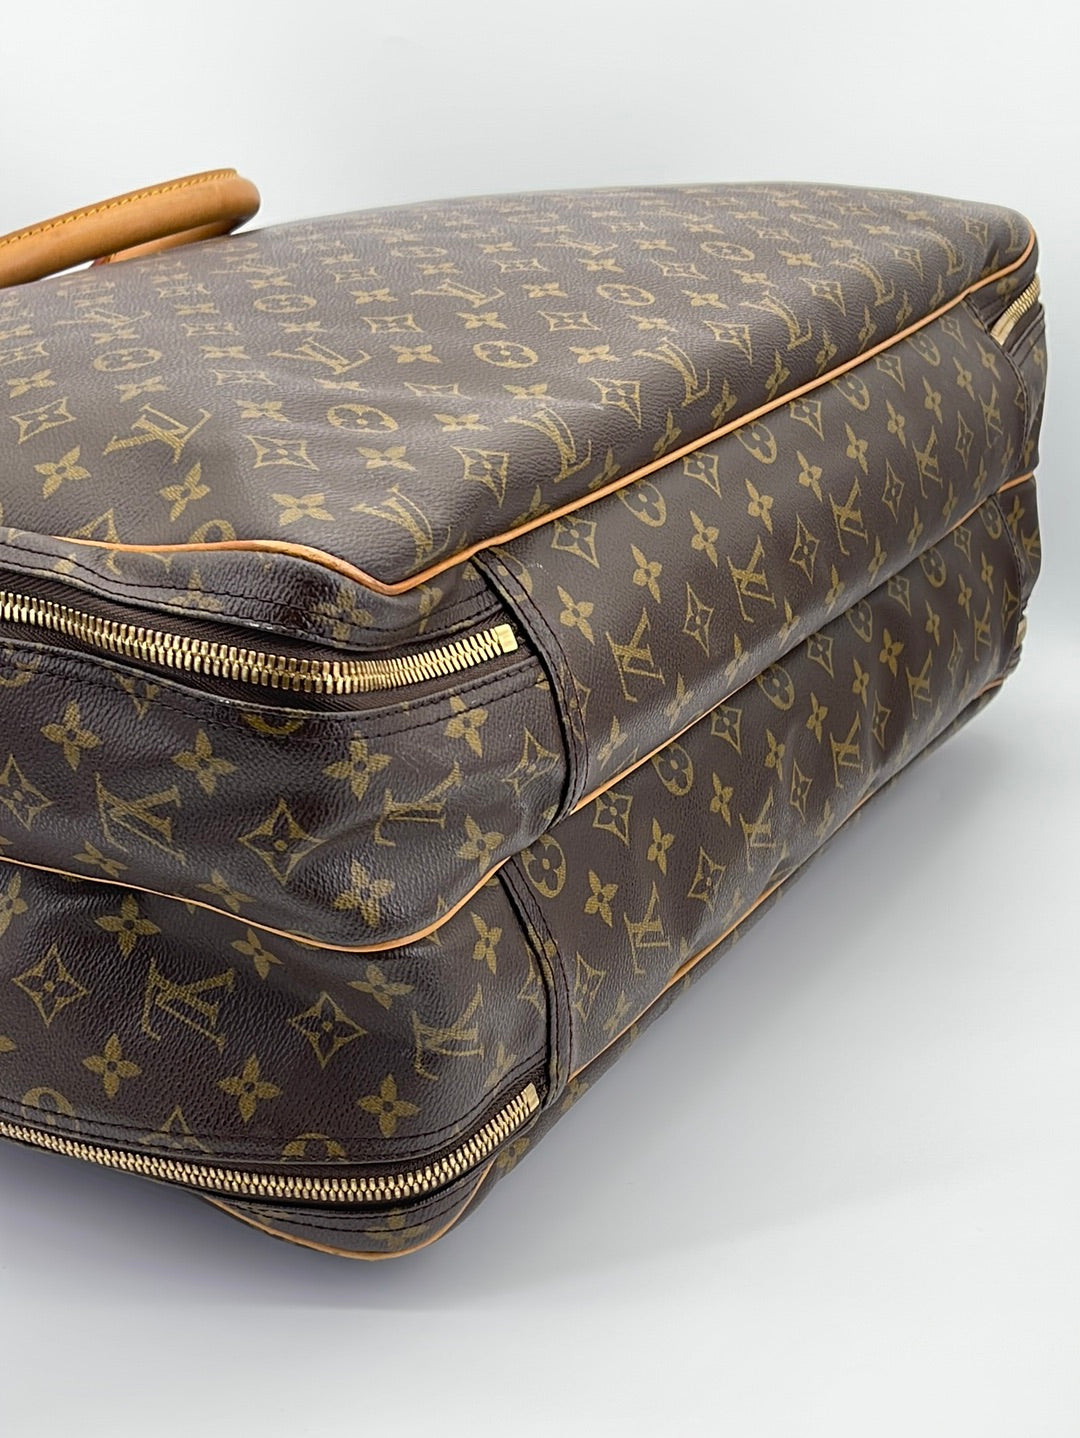 Pre-Owned Louis Vuitton Alize 2 Poches MonogramBrown 